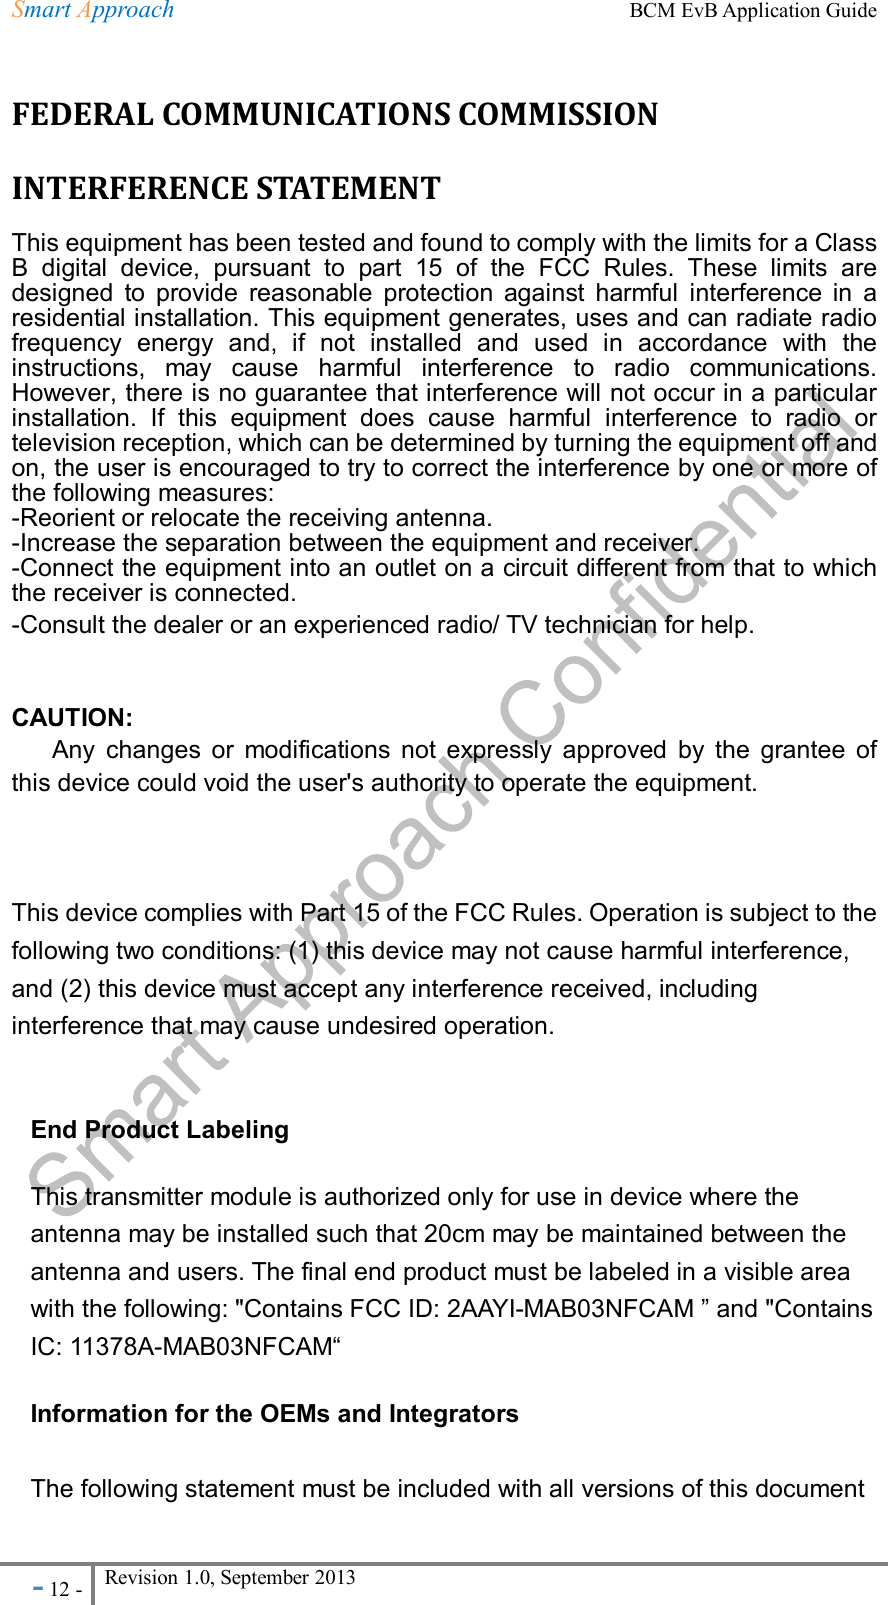 Smart Approach    BCM EvB Application Guide - 12 - Revision 1.0, September 2013                                                             FEDERAL COMMUNICATIONS COMMISSION INTERFERENCE STATEMENT   This equipment has been tested and found to comply with the limits for a Class B  digital  device,  pursuant  to  part  15  of  the  FCC  Rules.  These  limits  are designed  to  provide  reasonable  protection  against  harmful  interference  in  a residential installation. This equipment generates, uses and can radiate radio frequency  energy  and,  if  not  installed  and  used  in  accordance  with  the instructions,  may  cause  harmful  interference  to  radio  communications. However, there is no guarantee that interference will not occur in a particular installation.  If  this  equipment  does  cause  harmful  interference  to  radio  or television reception, which can be determined by turning the equipment off and on, the user is encouraged to try to correct the interference by one or more of the following measures: -Reorient or relocate the receiving antenna. -Increase the separation between the equipment and receiver. -Connect the equipment into an outlet on a circuit different from that to which the receiver is connected. -Consult the dealer or an experienced radio/ TV technician for help.   CAUTION:   Any  changes  or  modifications  not  expressly  approved  by  the  grantee  of this device could void the user&apos;s authority to operate the equipment.  This device complies with Part 15 of the FCC Rules. Operation is subject to the following two conditions: (1) this device may not cause harmful interference, and (2) this device must accept any interference received, including interference that may cause undesired operation.  End Product Labeling This transmitter module is authorized only for use in device where the antenna may be installed such that 20cm may be maintained between the antenna and users. The final end product must be labeled in a visible area with the following: &quot;Contains FCC ID: 2AAYI-MAB03NFCAM ” and &quot;Contains IC: 11378A-MAB03NFCAM“ Information for the OEMs and Integrators  The following statement must be included with all versions of this document 